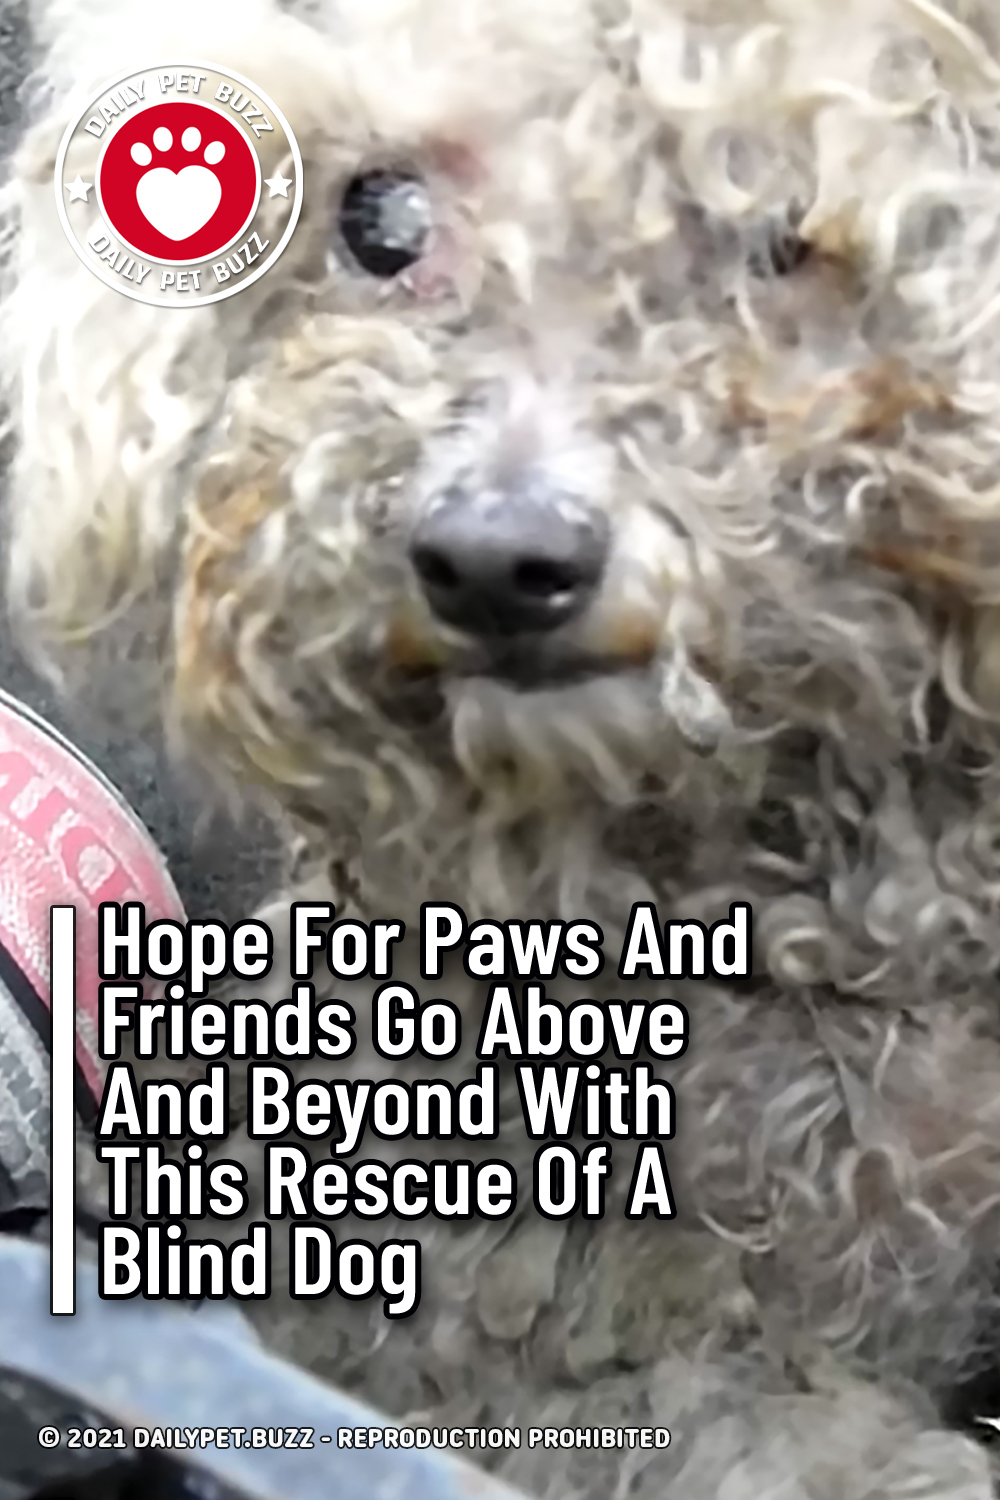 Hope For Paws And Friends Go Above And Beyond With This Rescue Of A Blind Dog